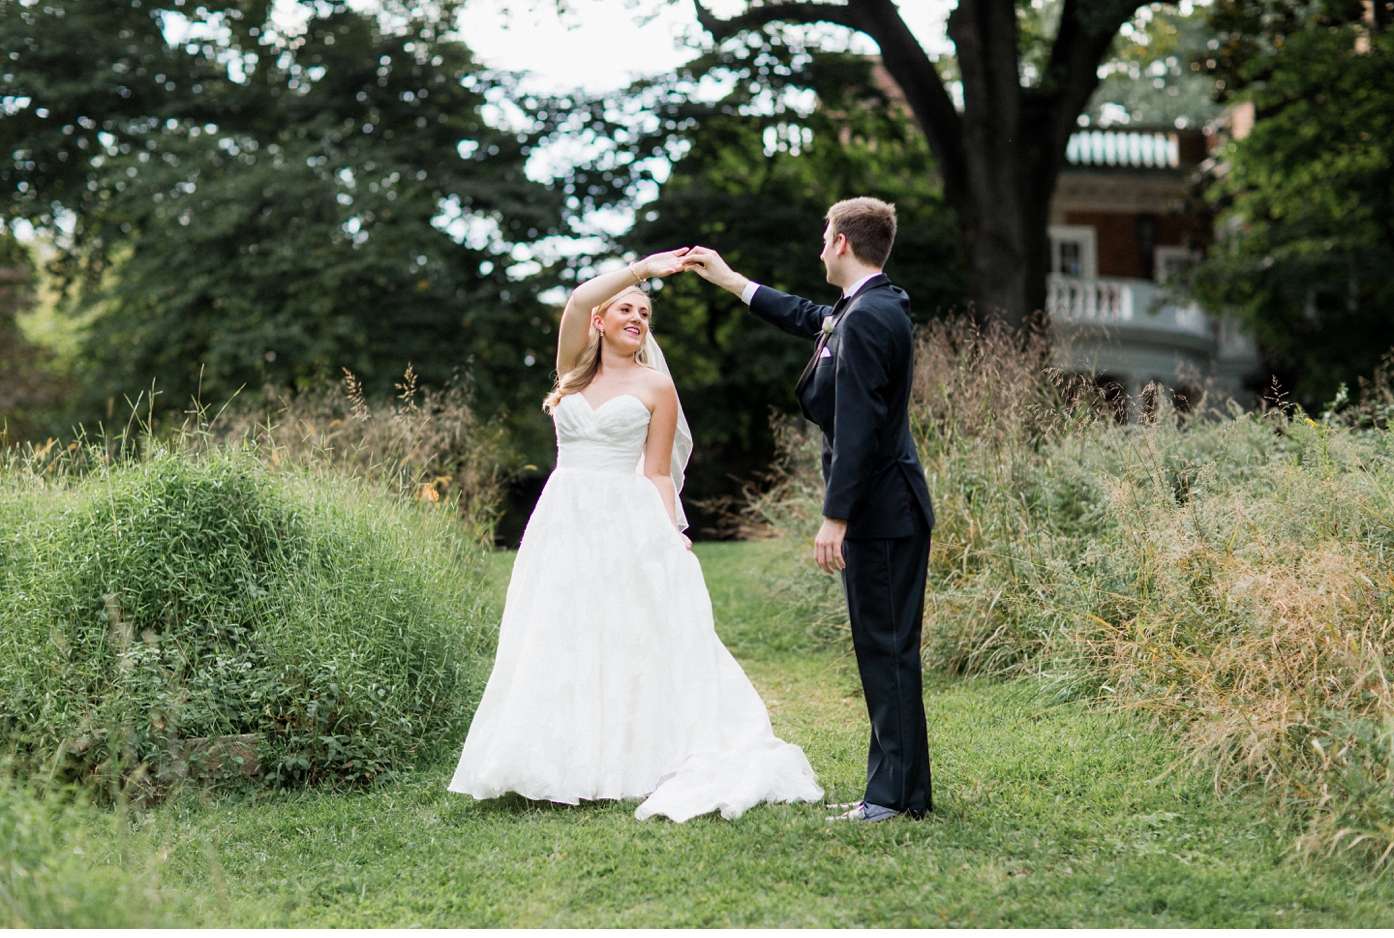 Woodend Sanctuary Wedding in Chevy Chase MD by Alisandra Photography